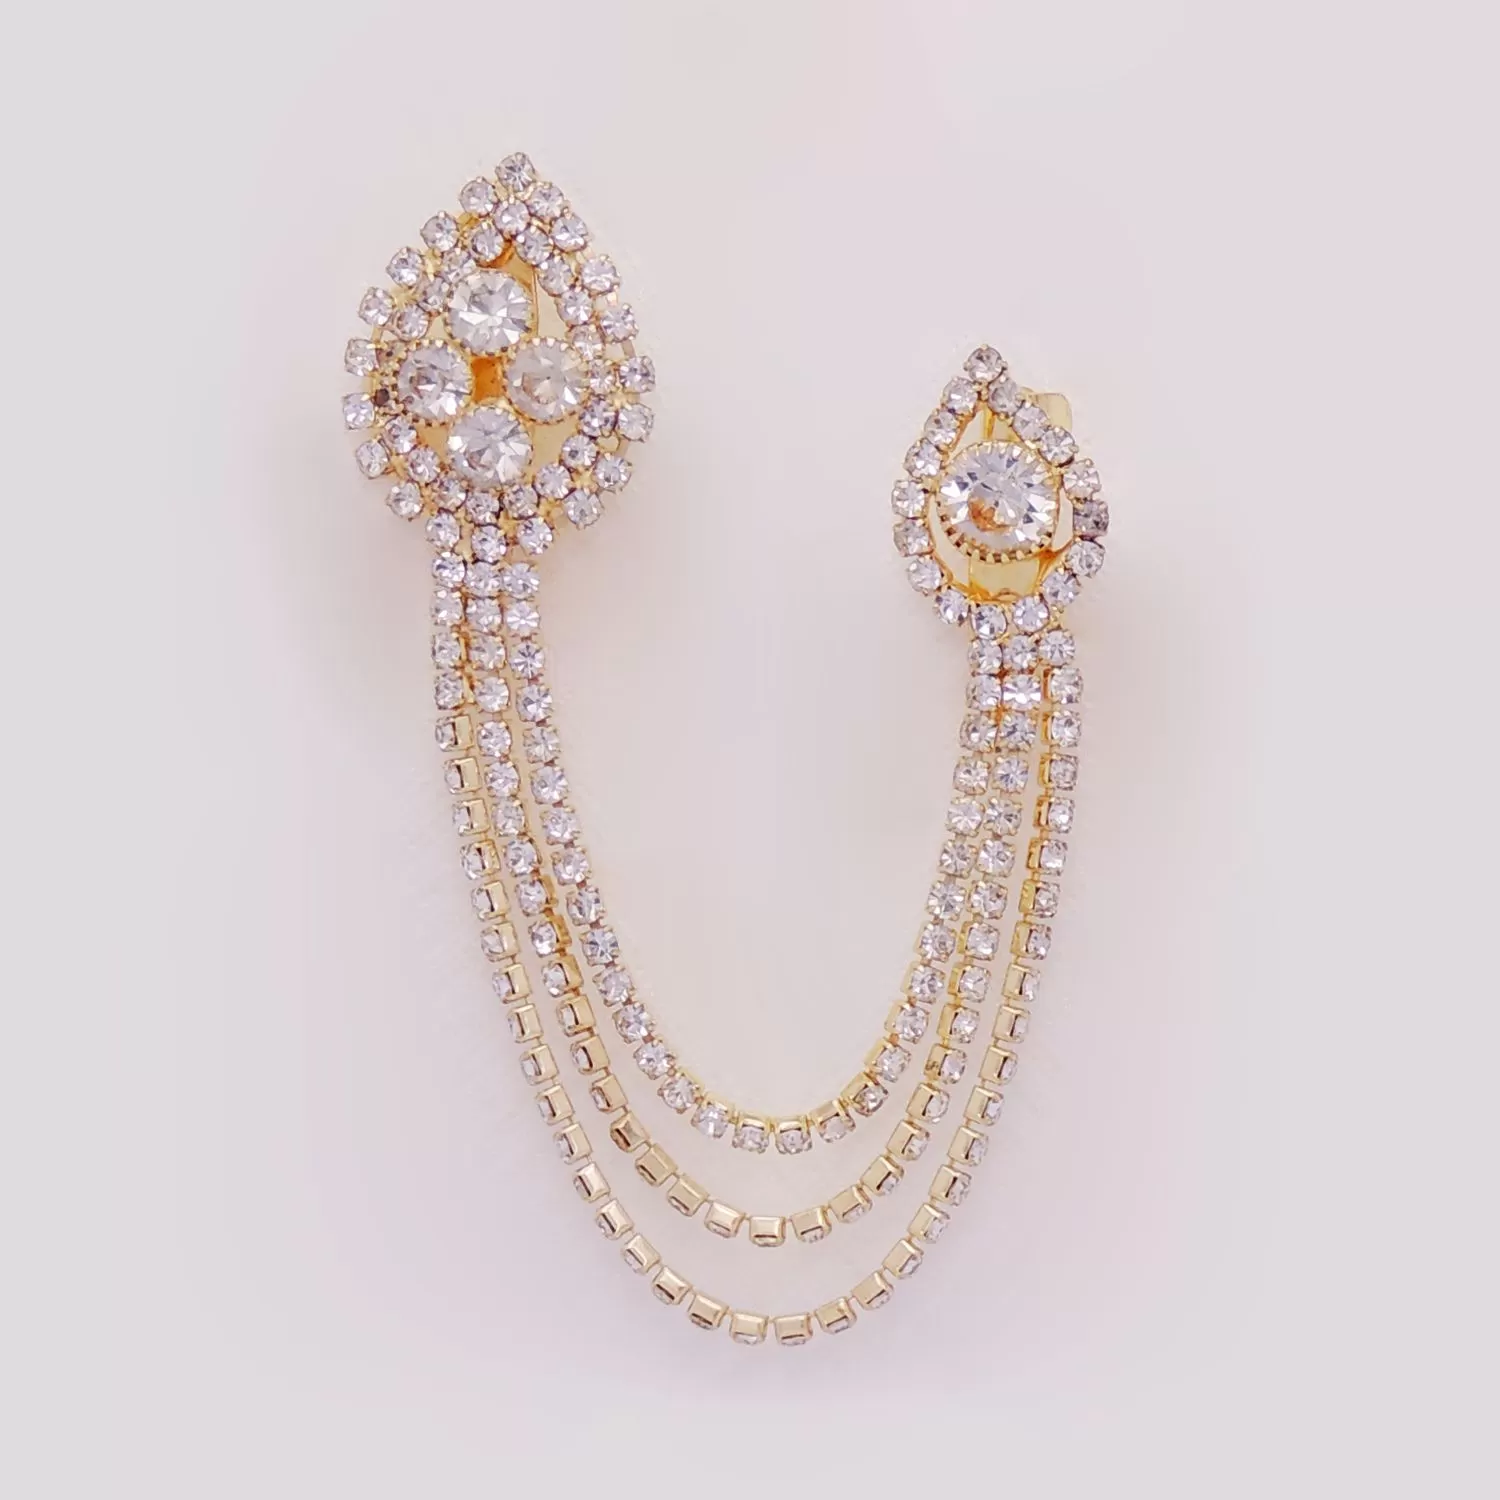 Zirconia Flower Golden Metal Chain with Semi-Precious Cubic Zirconia Brooch (Pack of 1 Pc.), 2 image